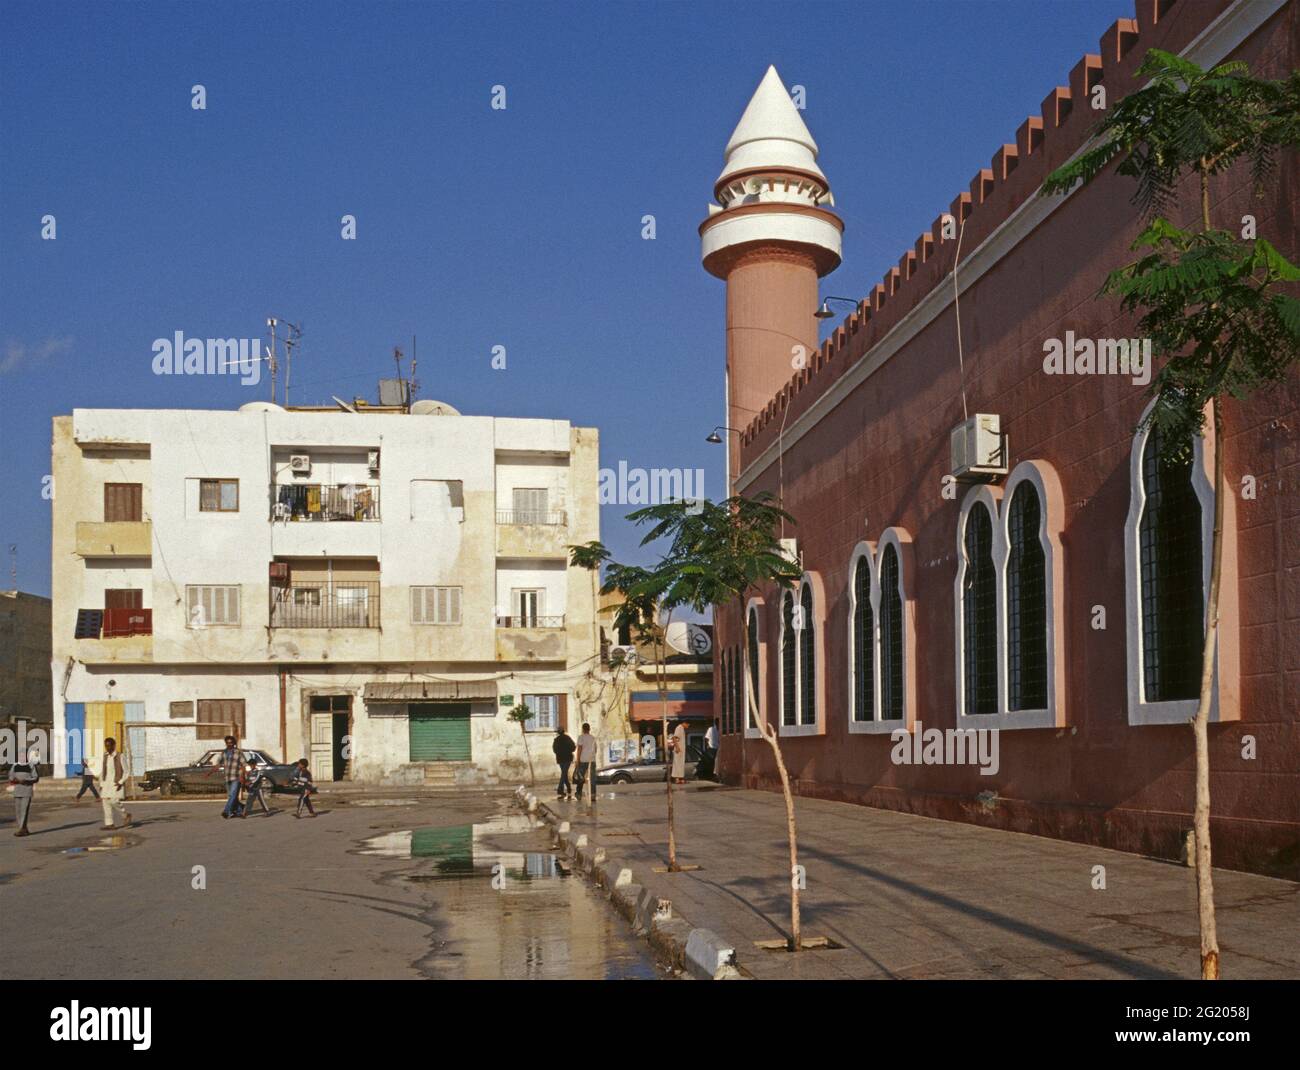 mosque and residential building in Benghazi, Libya Stock Photo